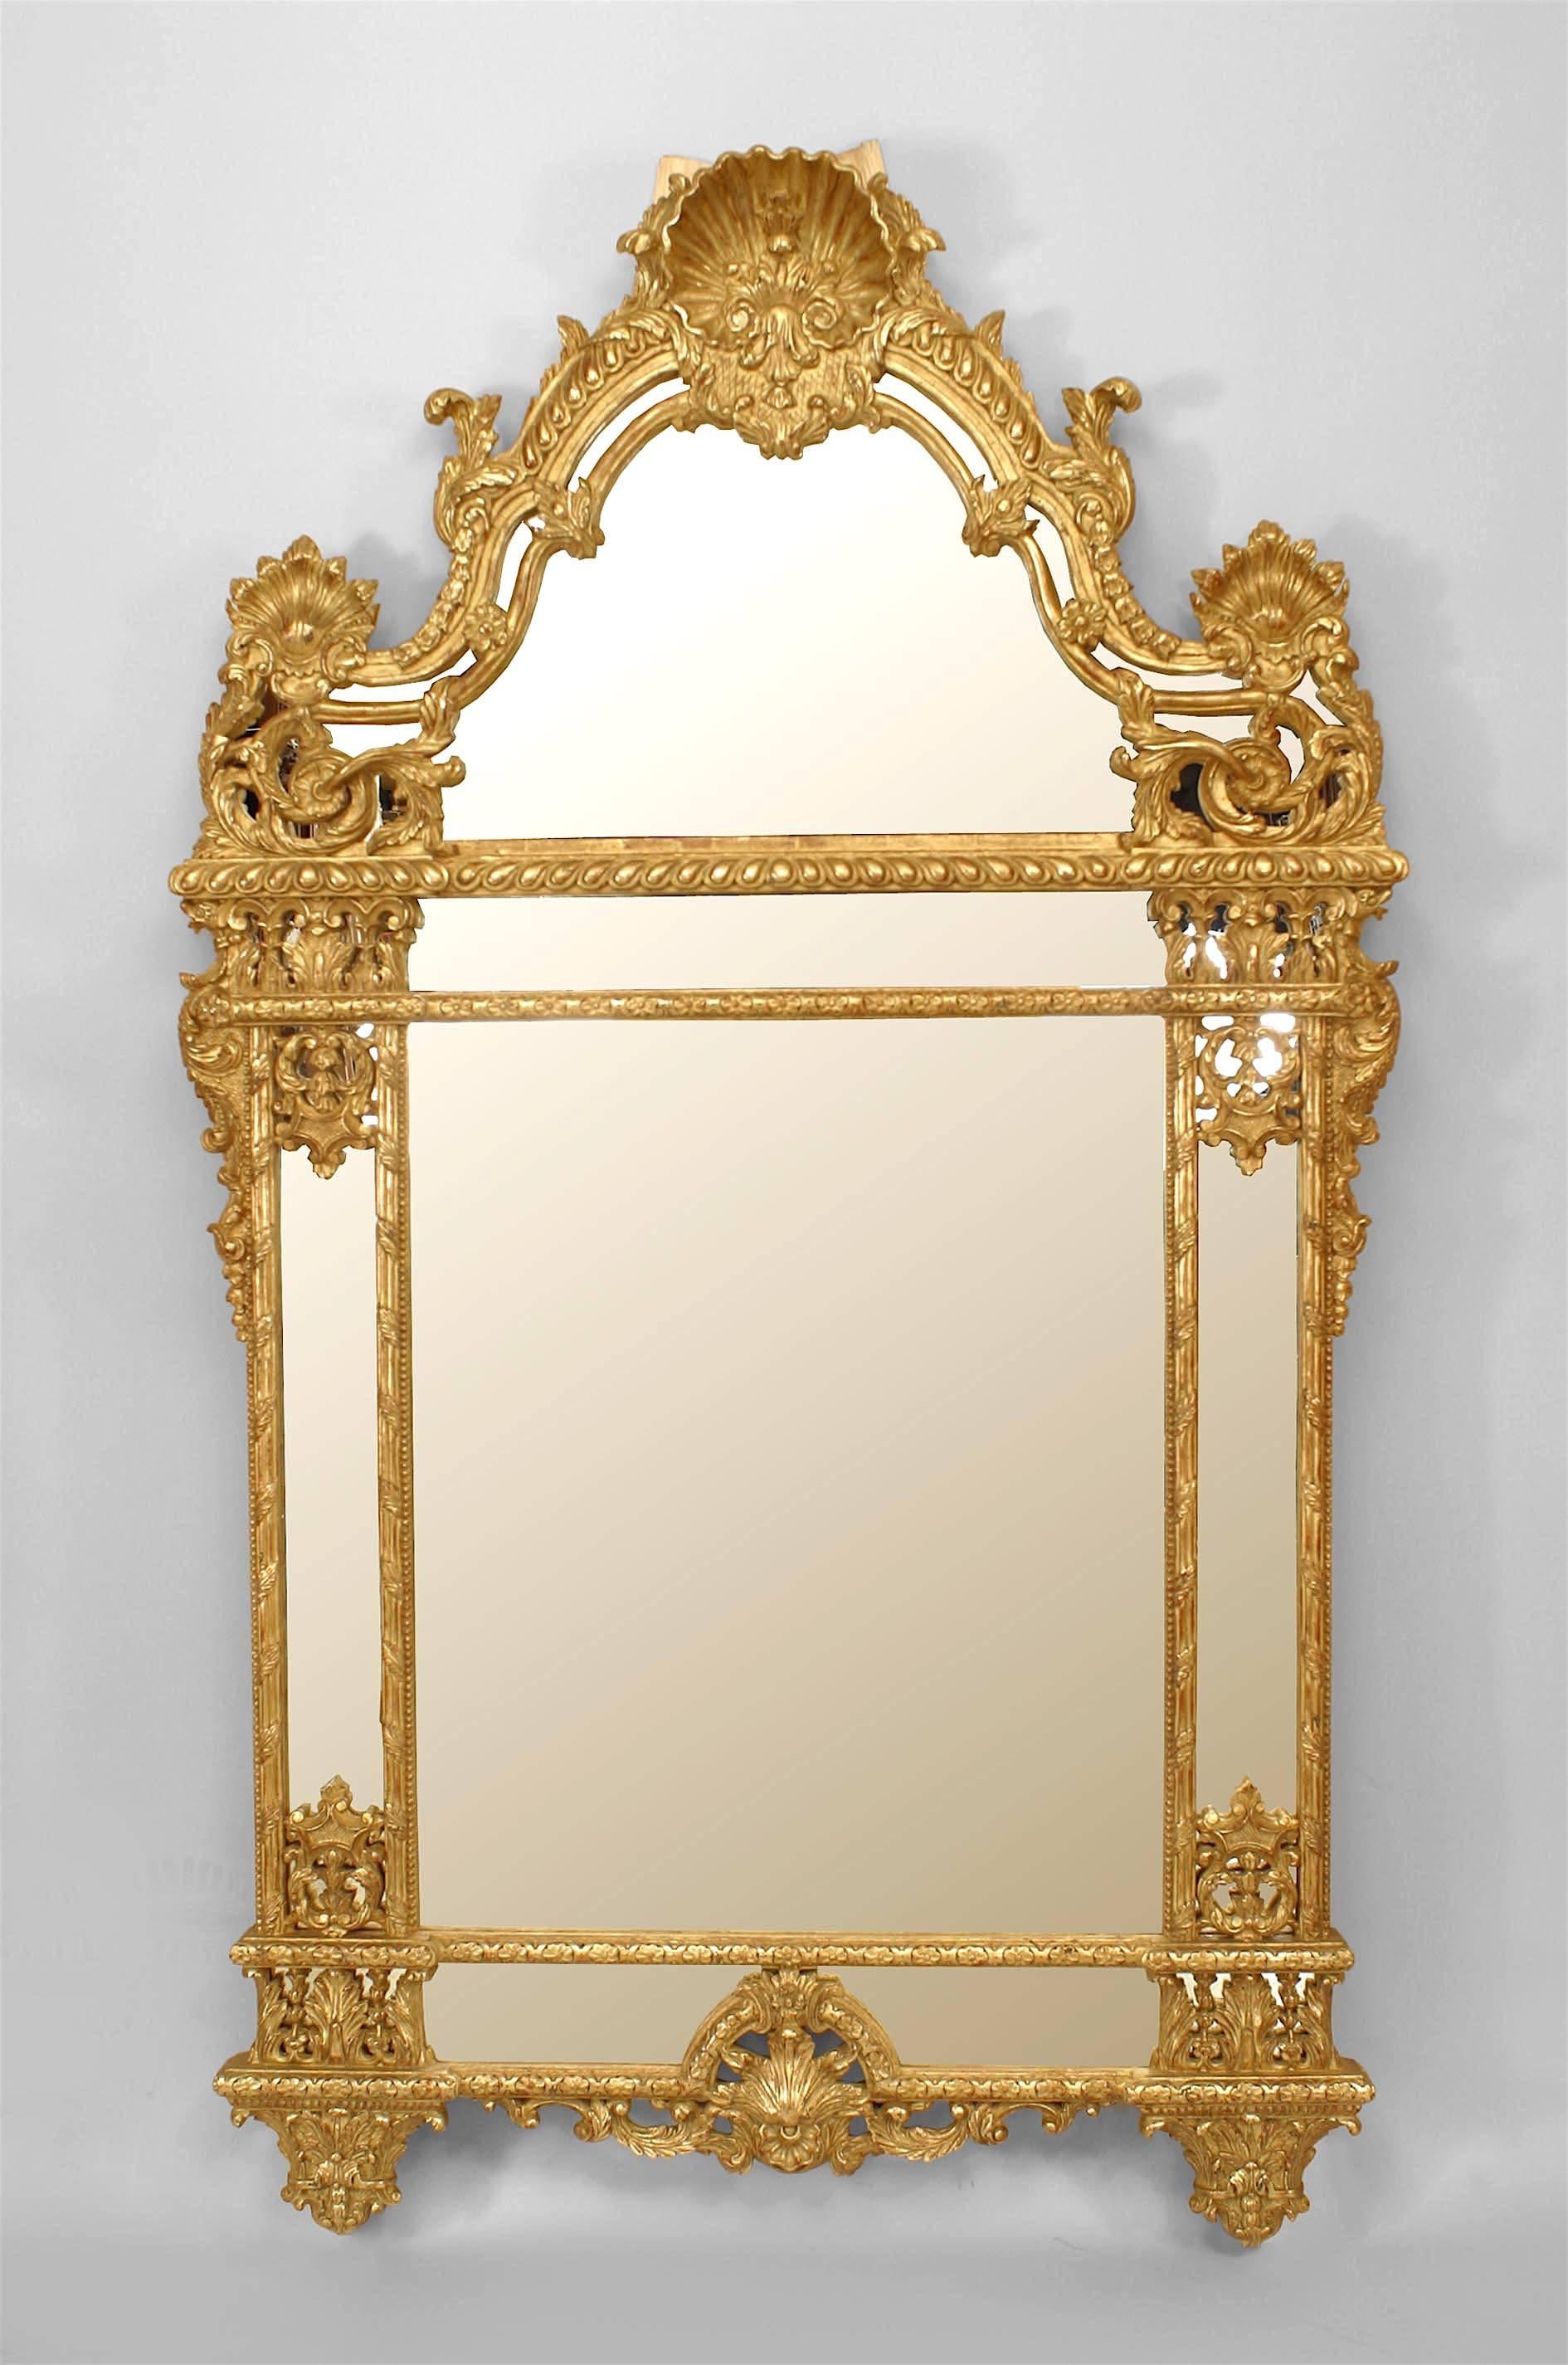 French Regence-style (20th Century) carved giltwood wall mirror with a pediment, side finials, and a shell form filigree carving over mirrored side panels.
